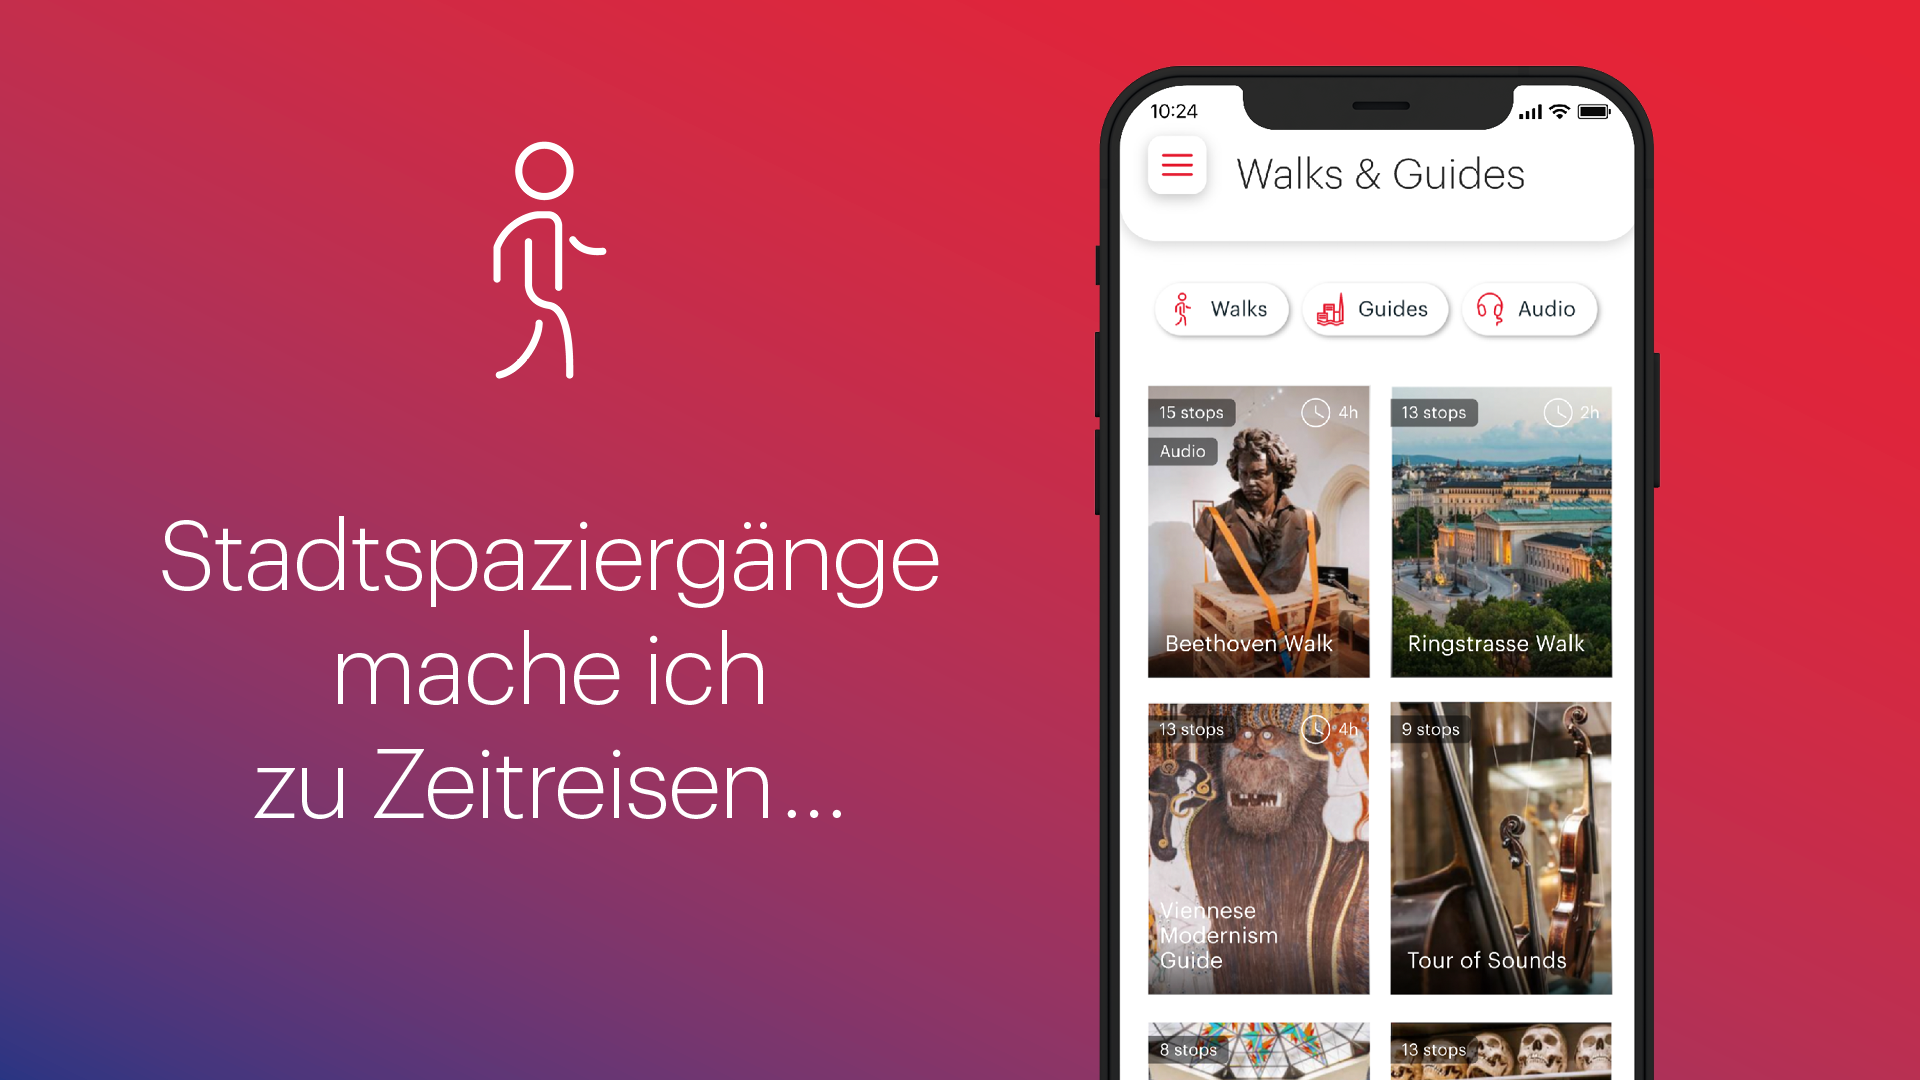 ivie App - Walks and Guides